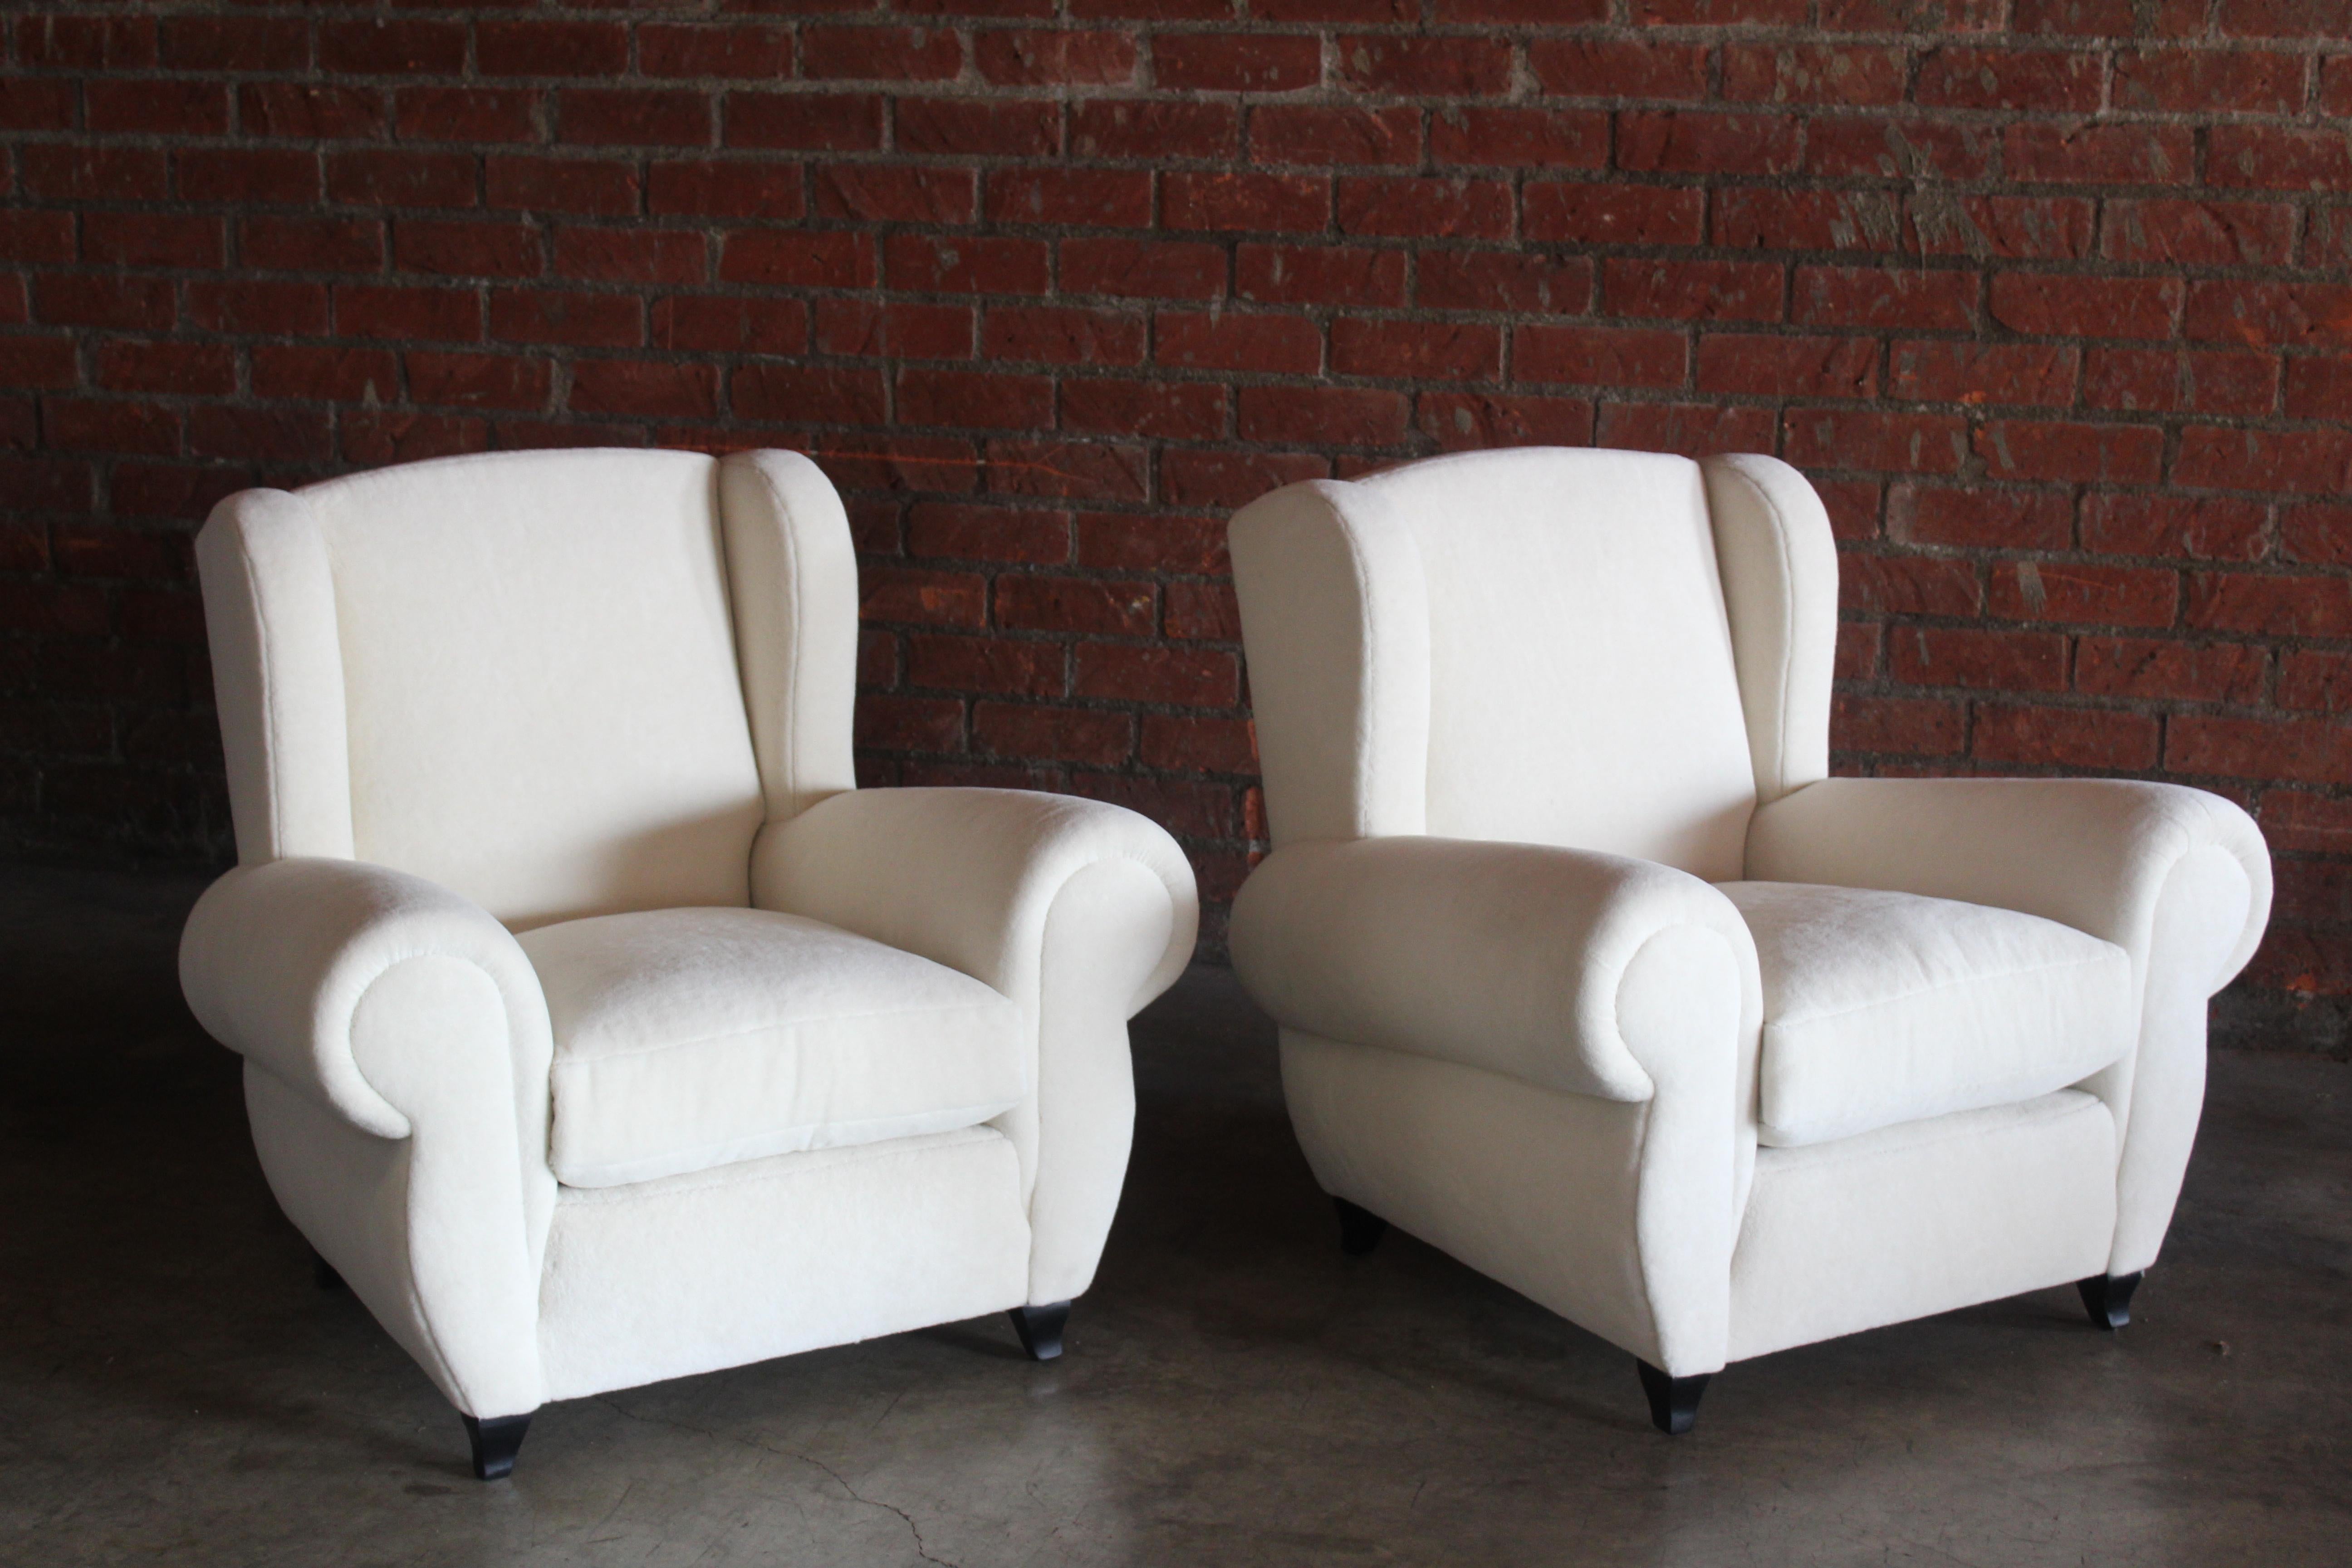 Pair of 1930s Maurice Rinck Style Art Deco French Club Chairs in Alpaca Wool For Sale 4